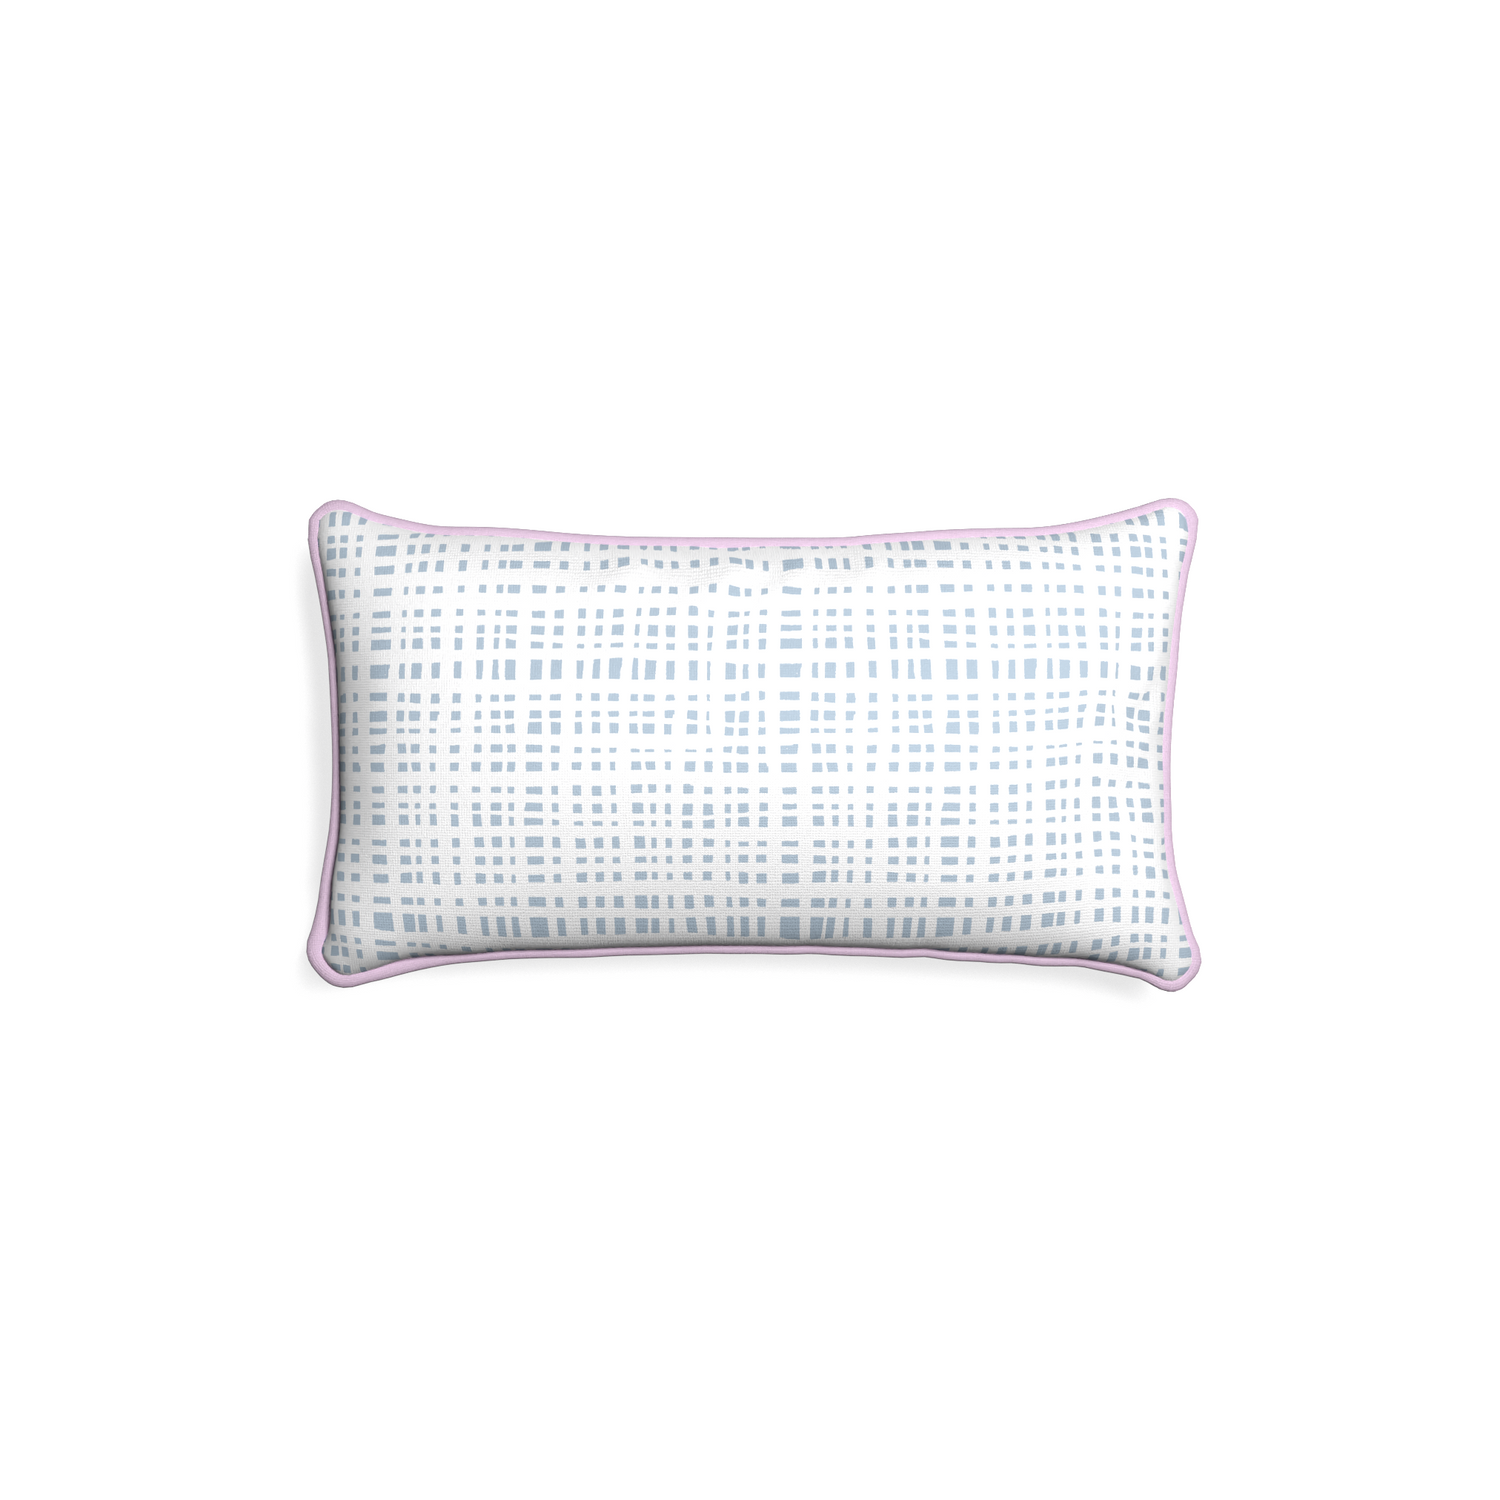 Petite-lumbar ginger sky custom plaid sky bluepillow with l piping on white background